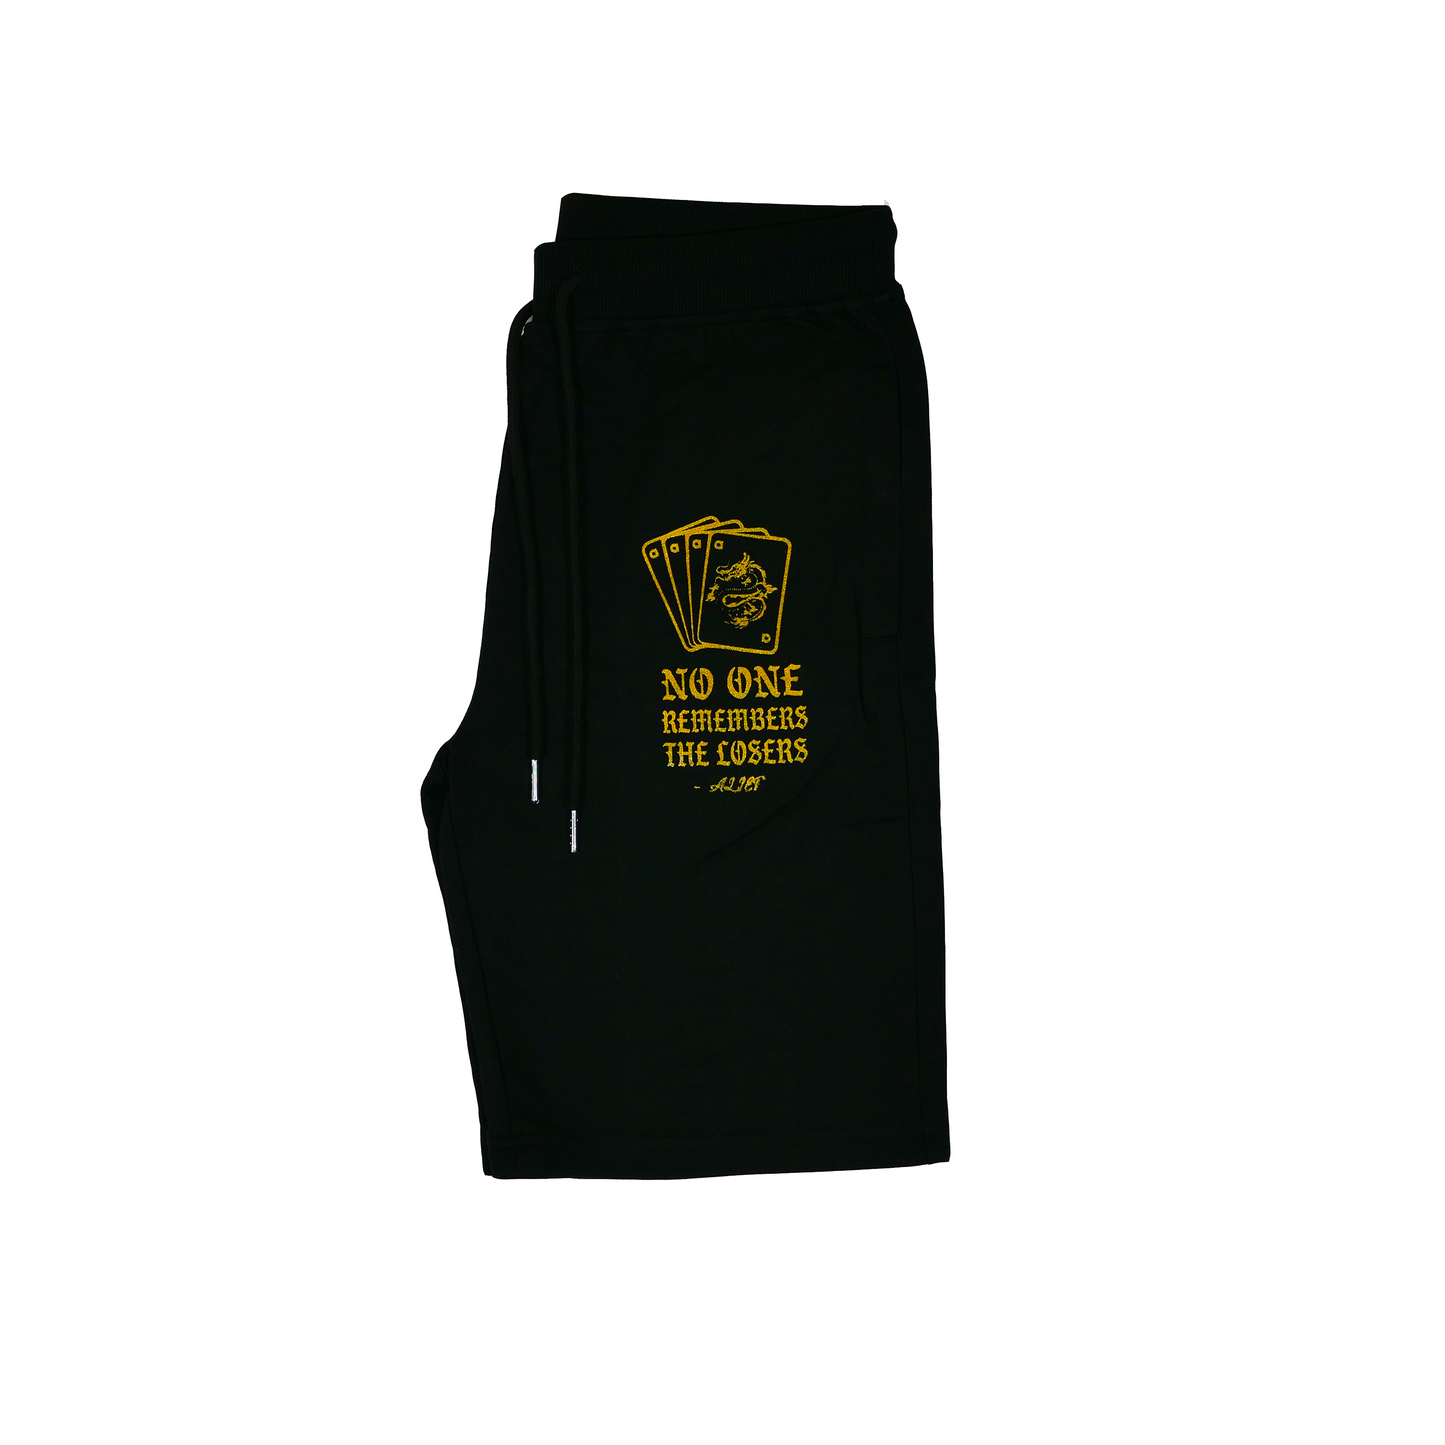 No One Remembers The Losers Shorts - Black/Gold